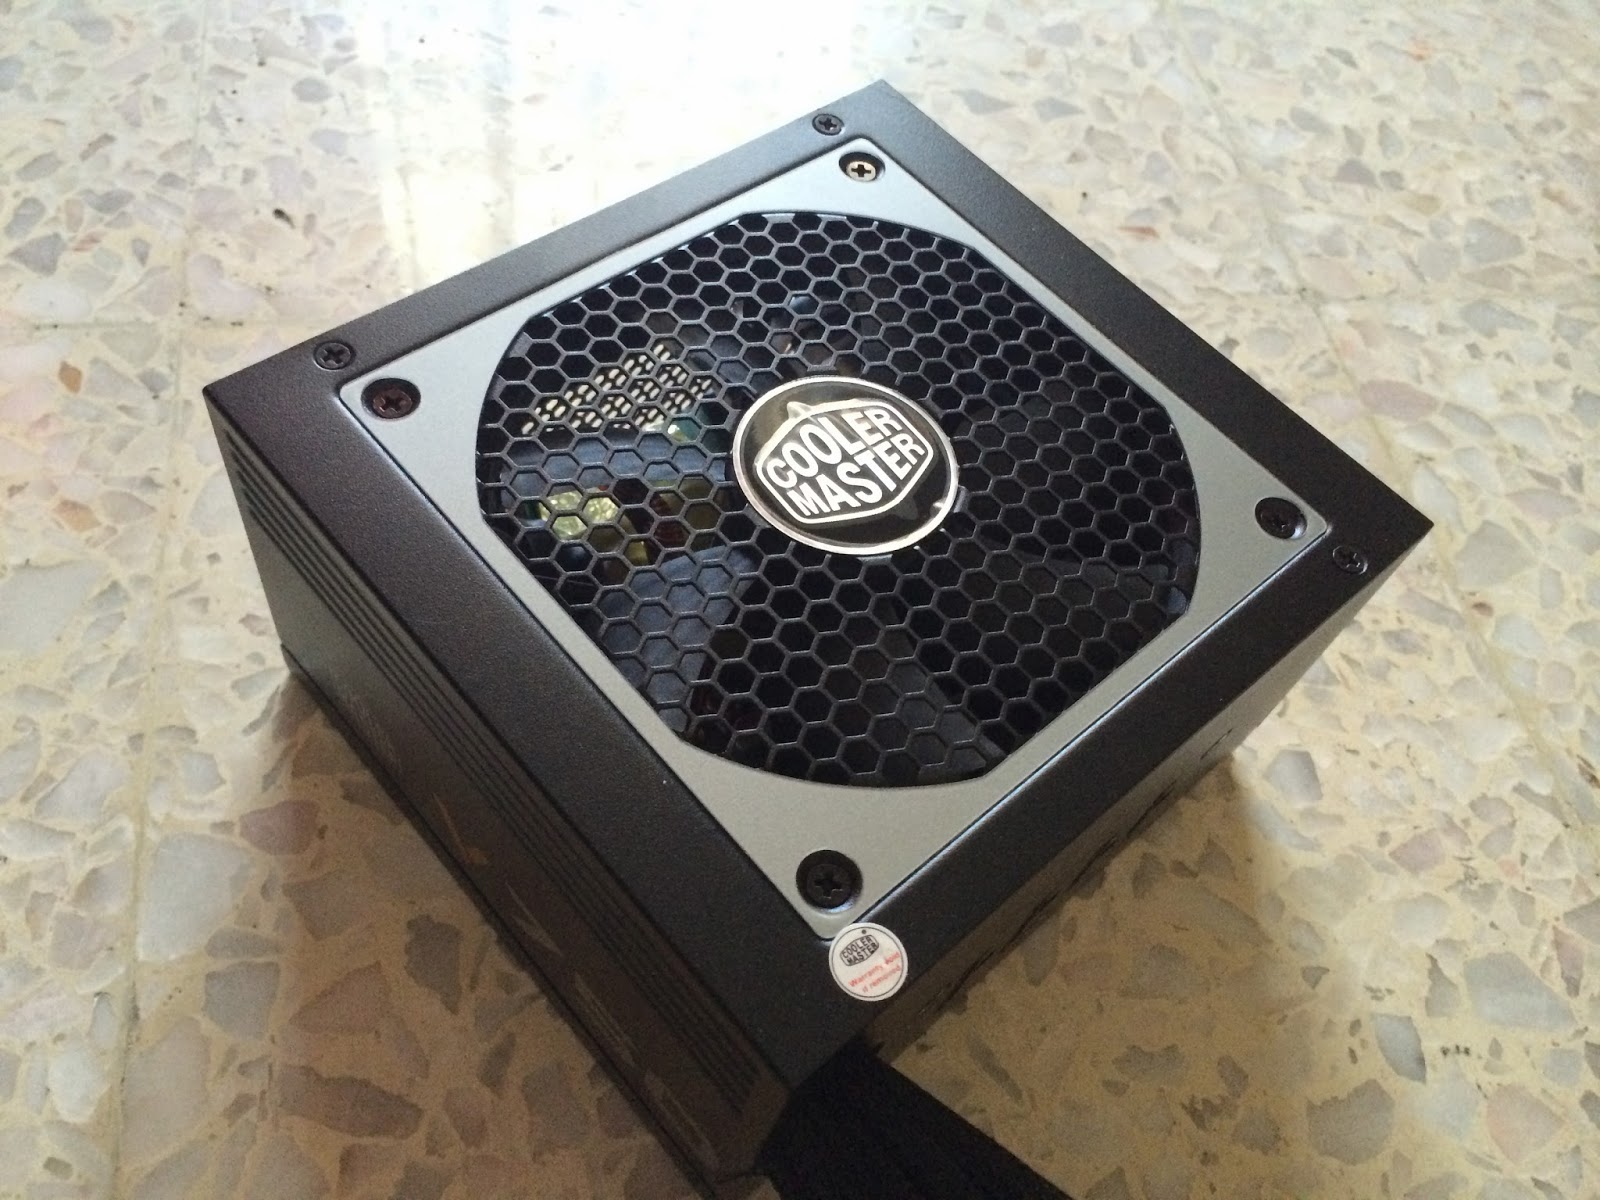 Cooler Master V750S Power Supply Unboxing & Overview 46